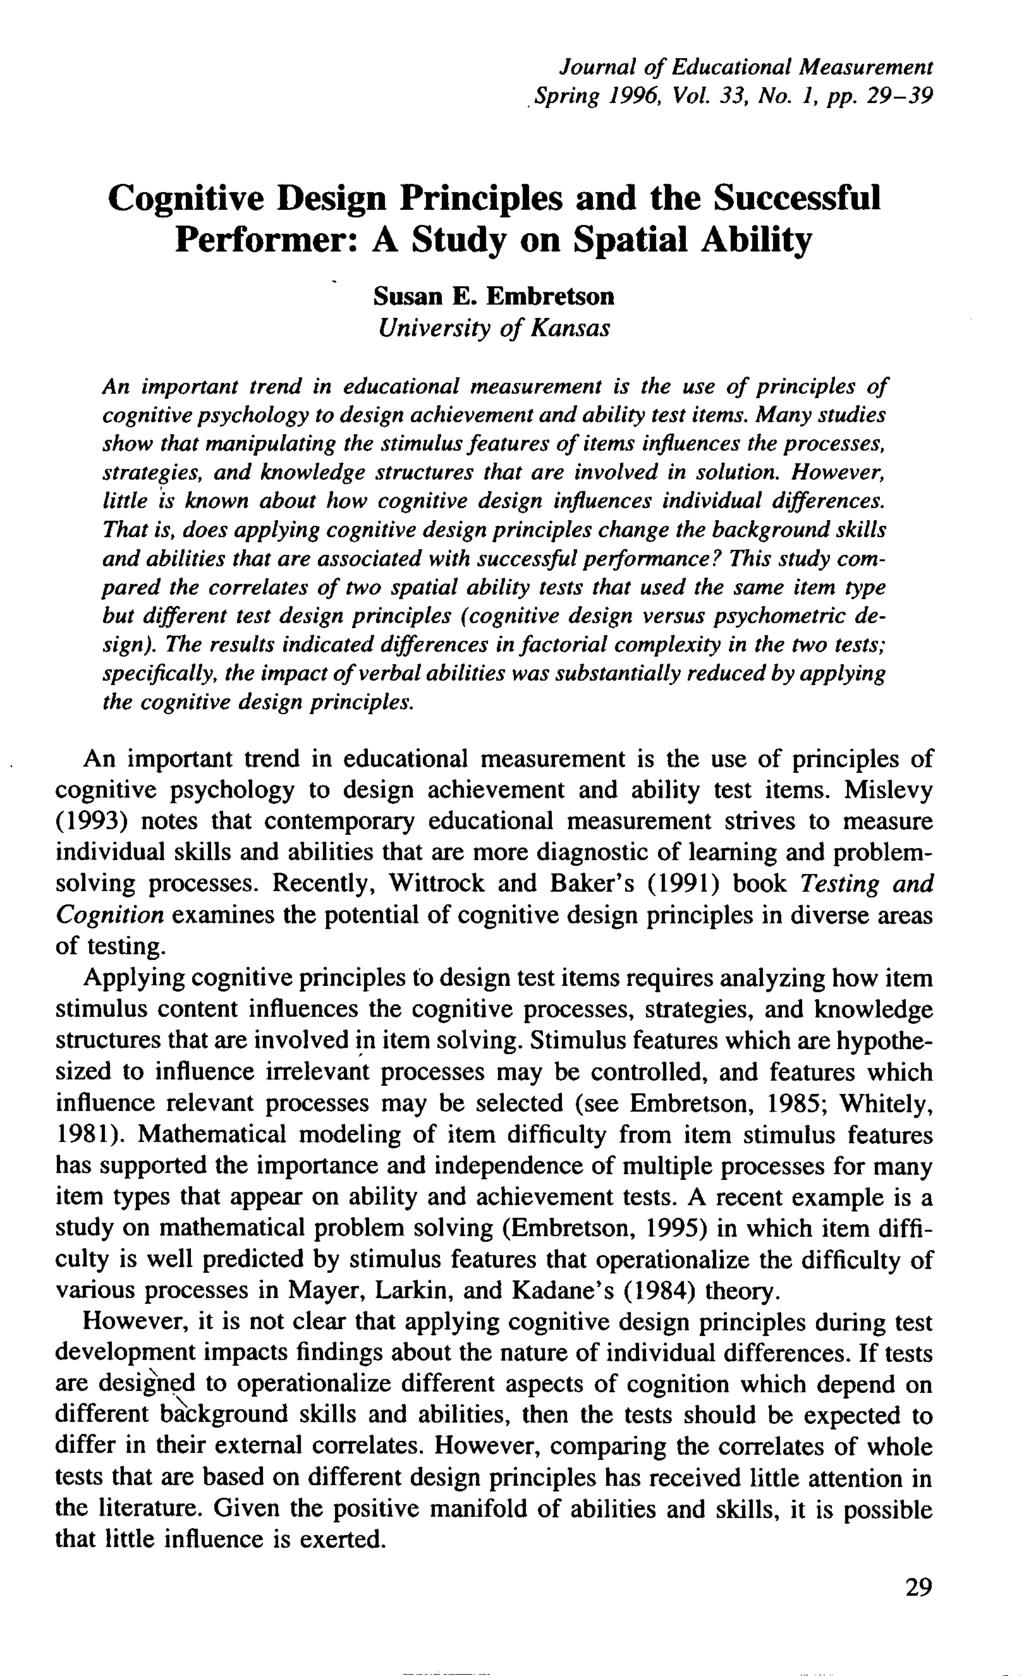 Journal of Educational Measurement Spring 1996, Vol. 33, No. 1, pp. 29-39 Cognitive Design Principles and the Successful Performer: A Study on Spatial Ability Susan E.